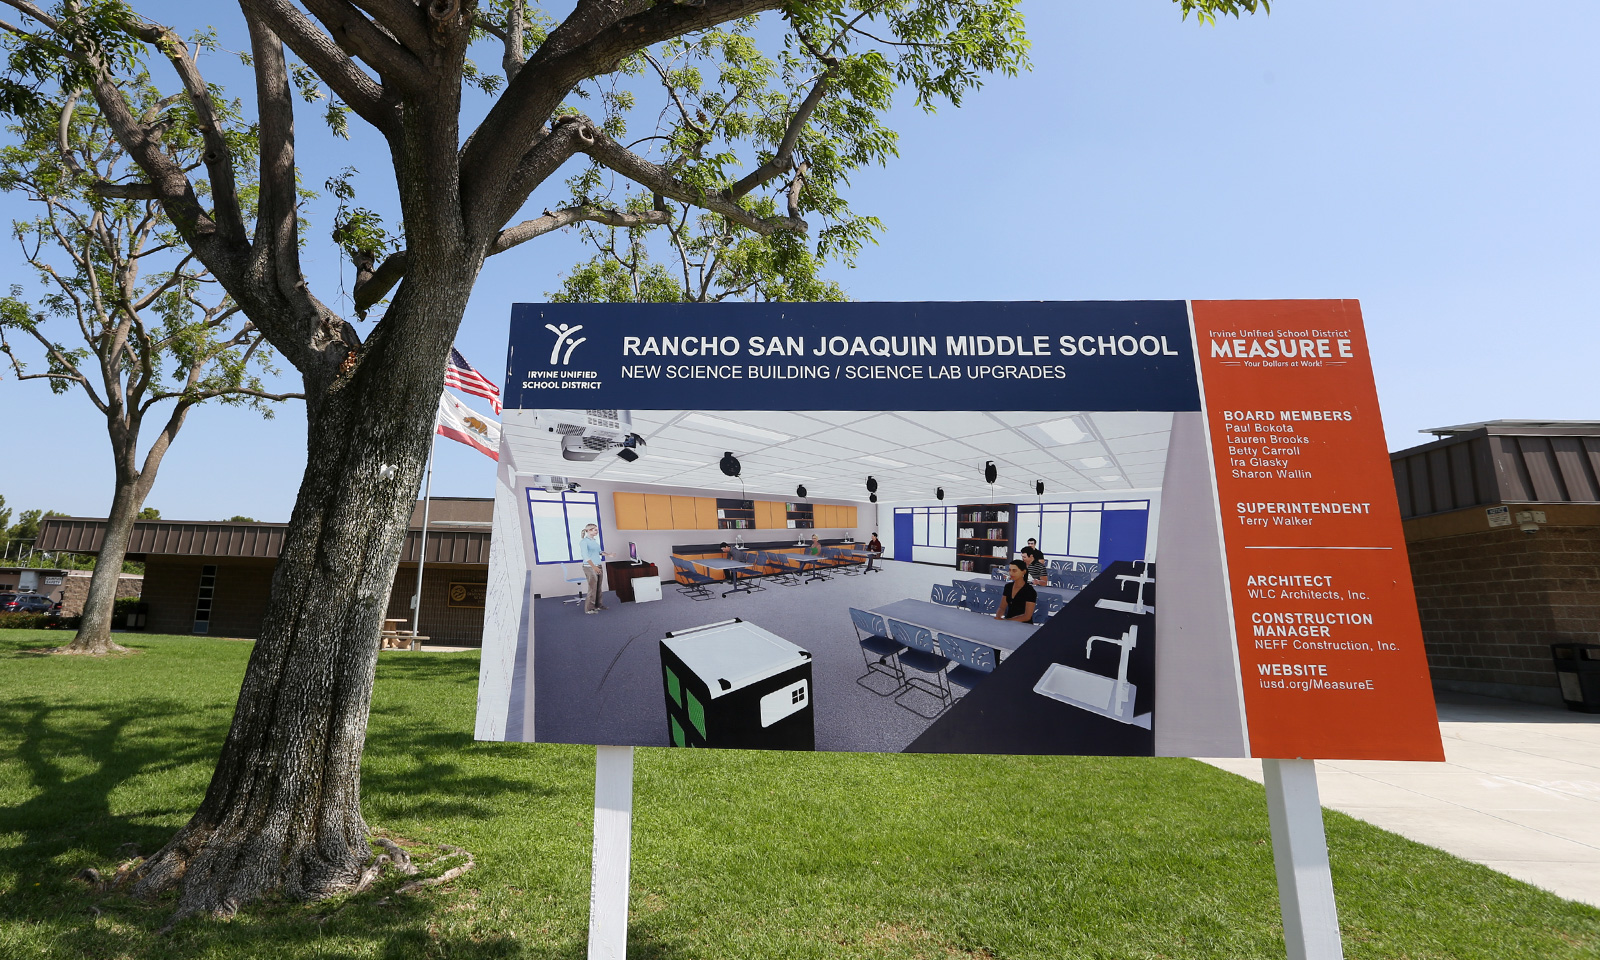 Rancho San Joaquin Middle School will be upgraded to meet the needs of future education using the Measure E bond funding.